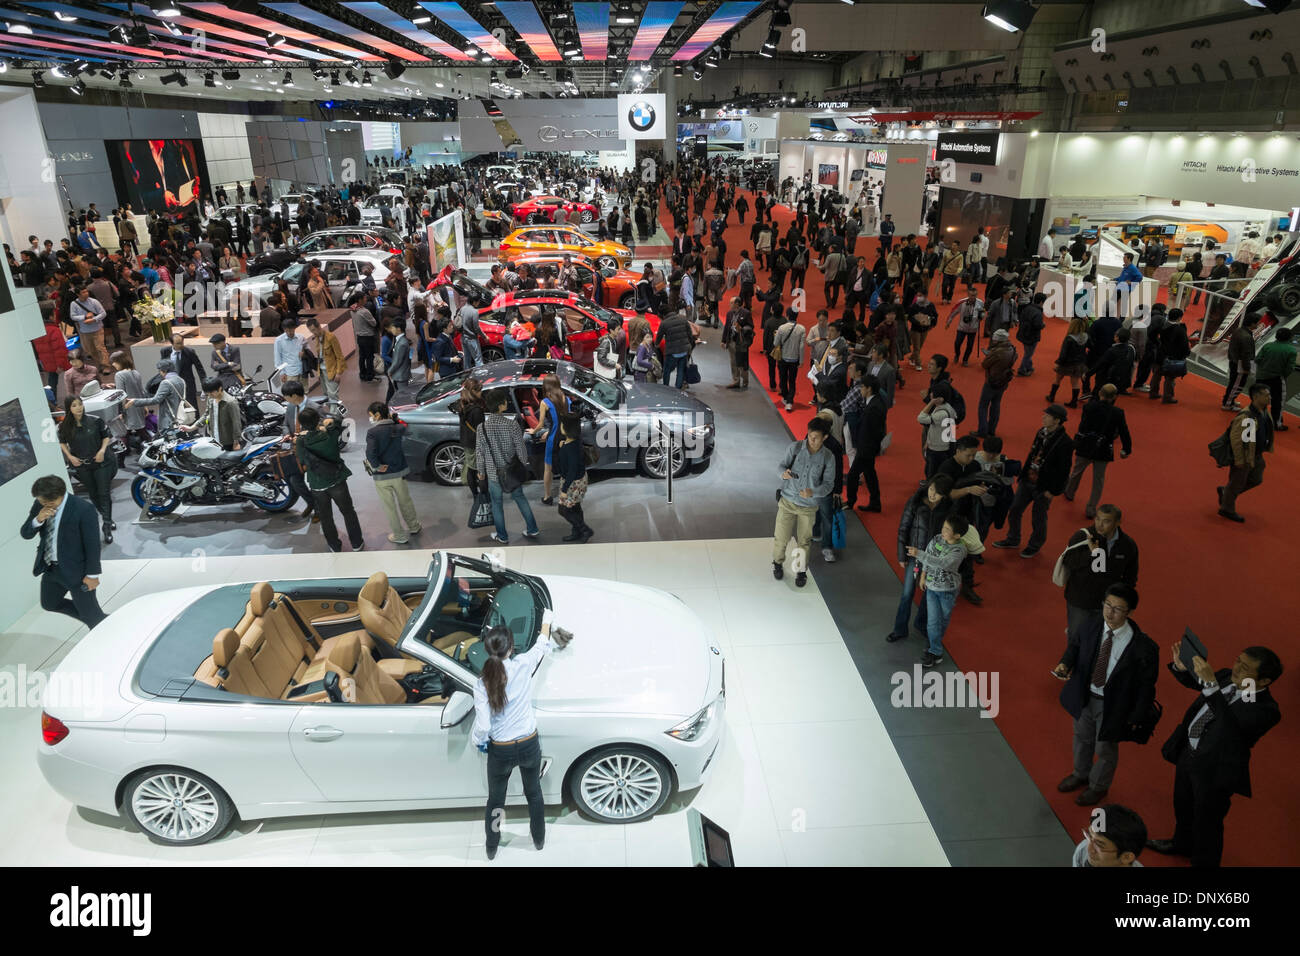 Interior view of exhibition hall at Tokyo Motor Show 2013 with large crowds of visitors Stock Photo